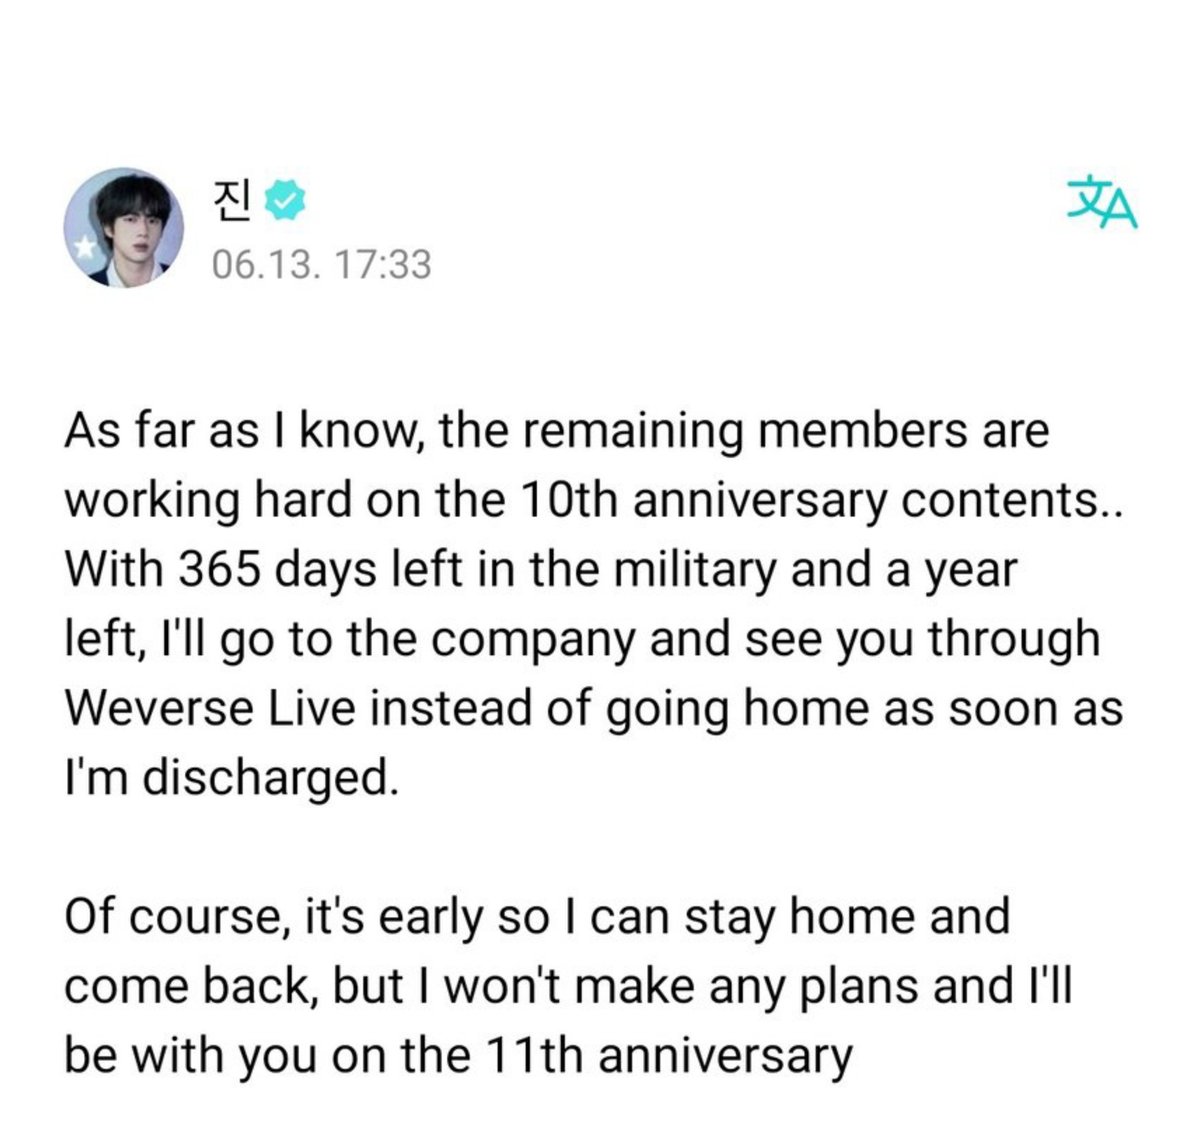 REMEMBER WHEN SEOKJIN

I'll go to the company and see you through Weverse Live instead of going home as soon as I'm discharged.

'But I won't make any plans and be with you on the 11th anniversary!!'

SEOKJIN IS COMING BACK IN A MONTH 😭